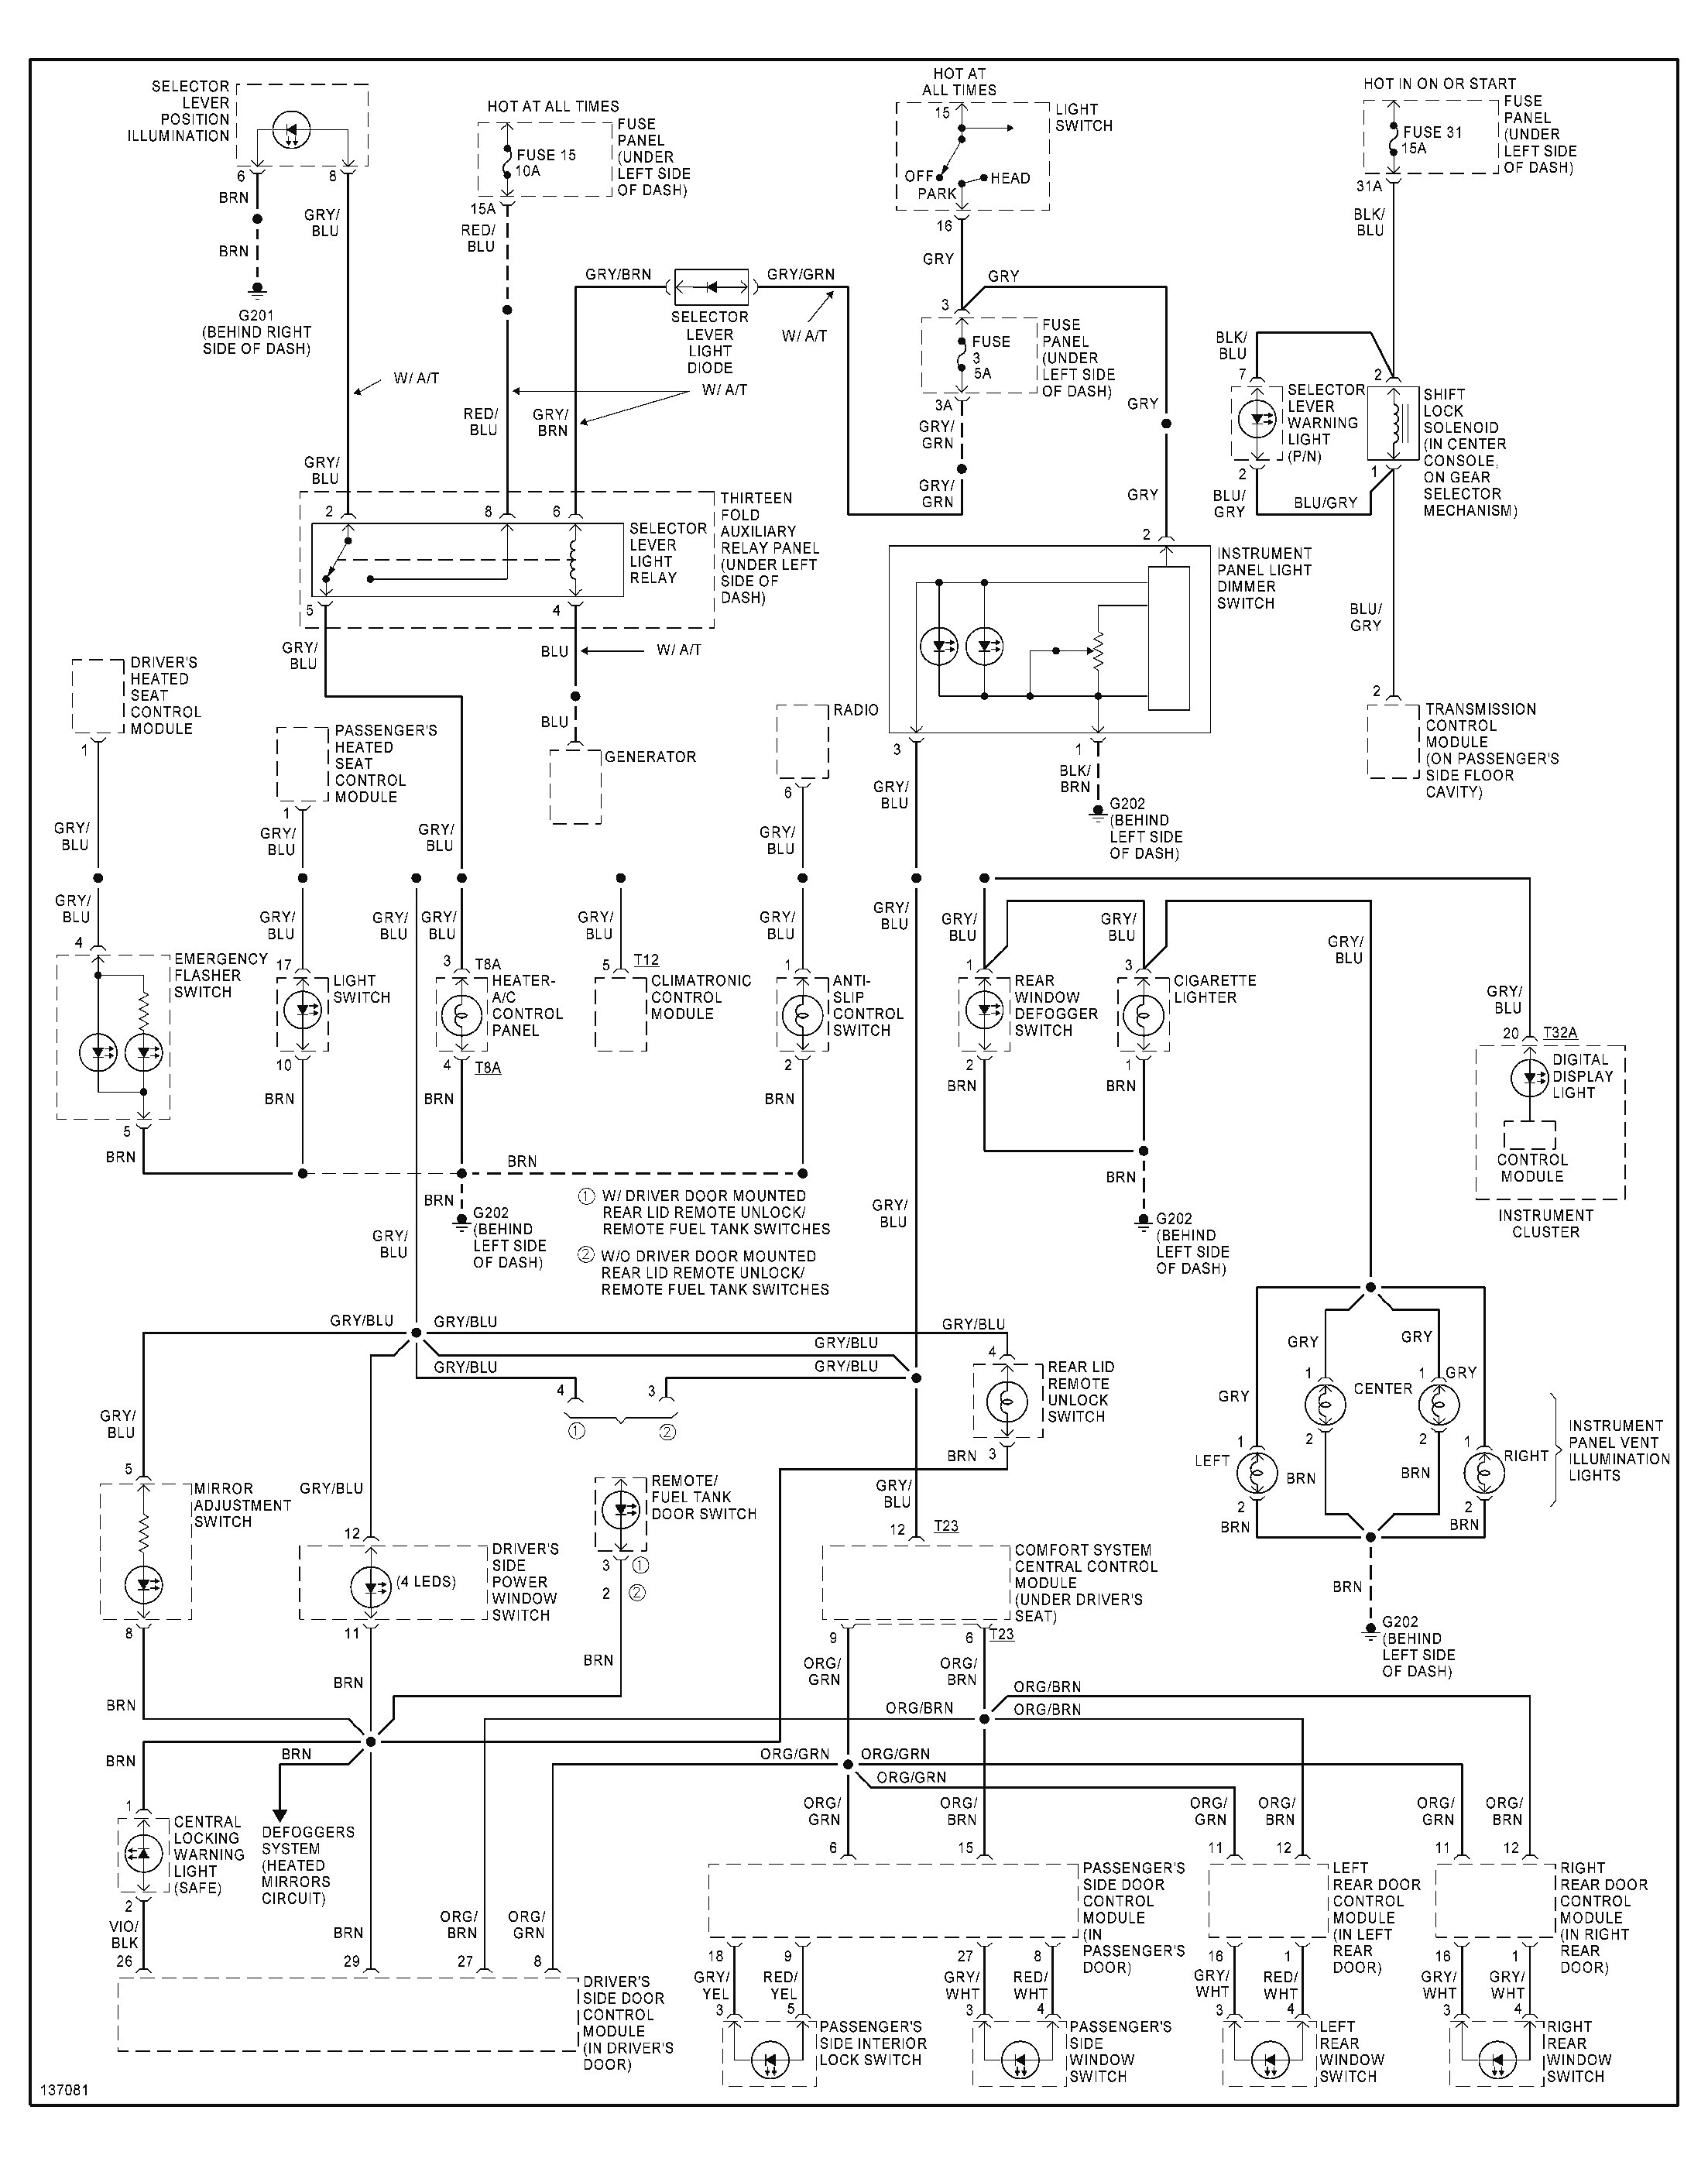 Sony Cdx Gt310 Wiring Diagram from mainetreasurechest.com